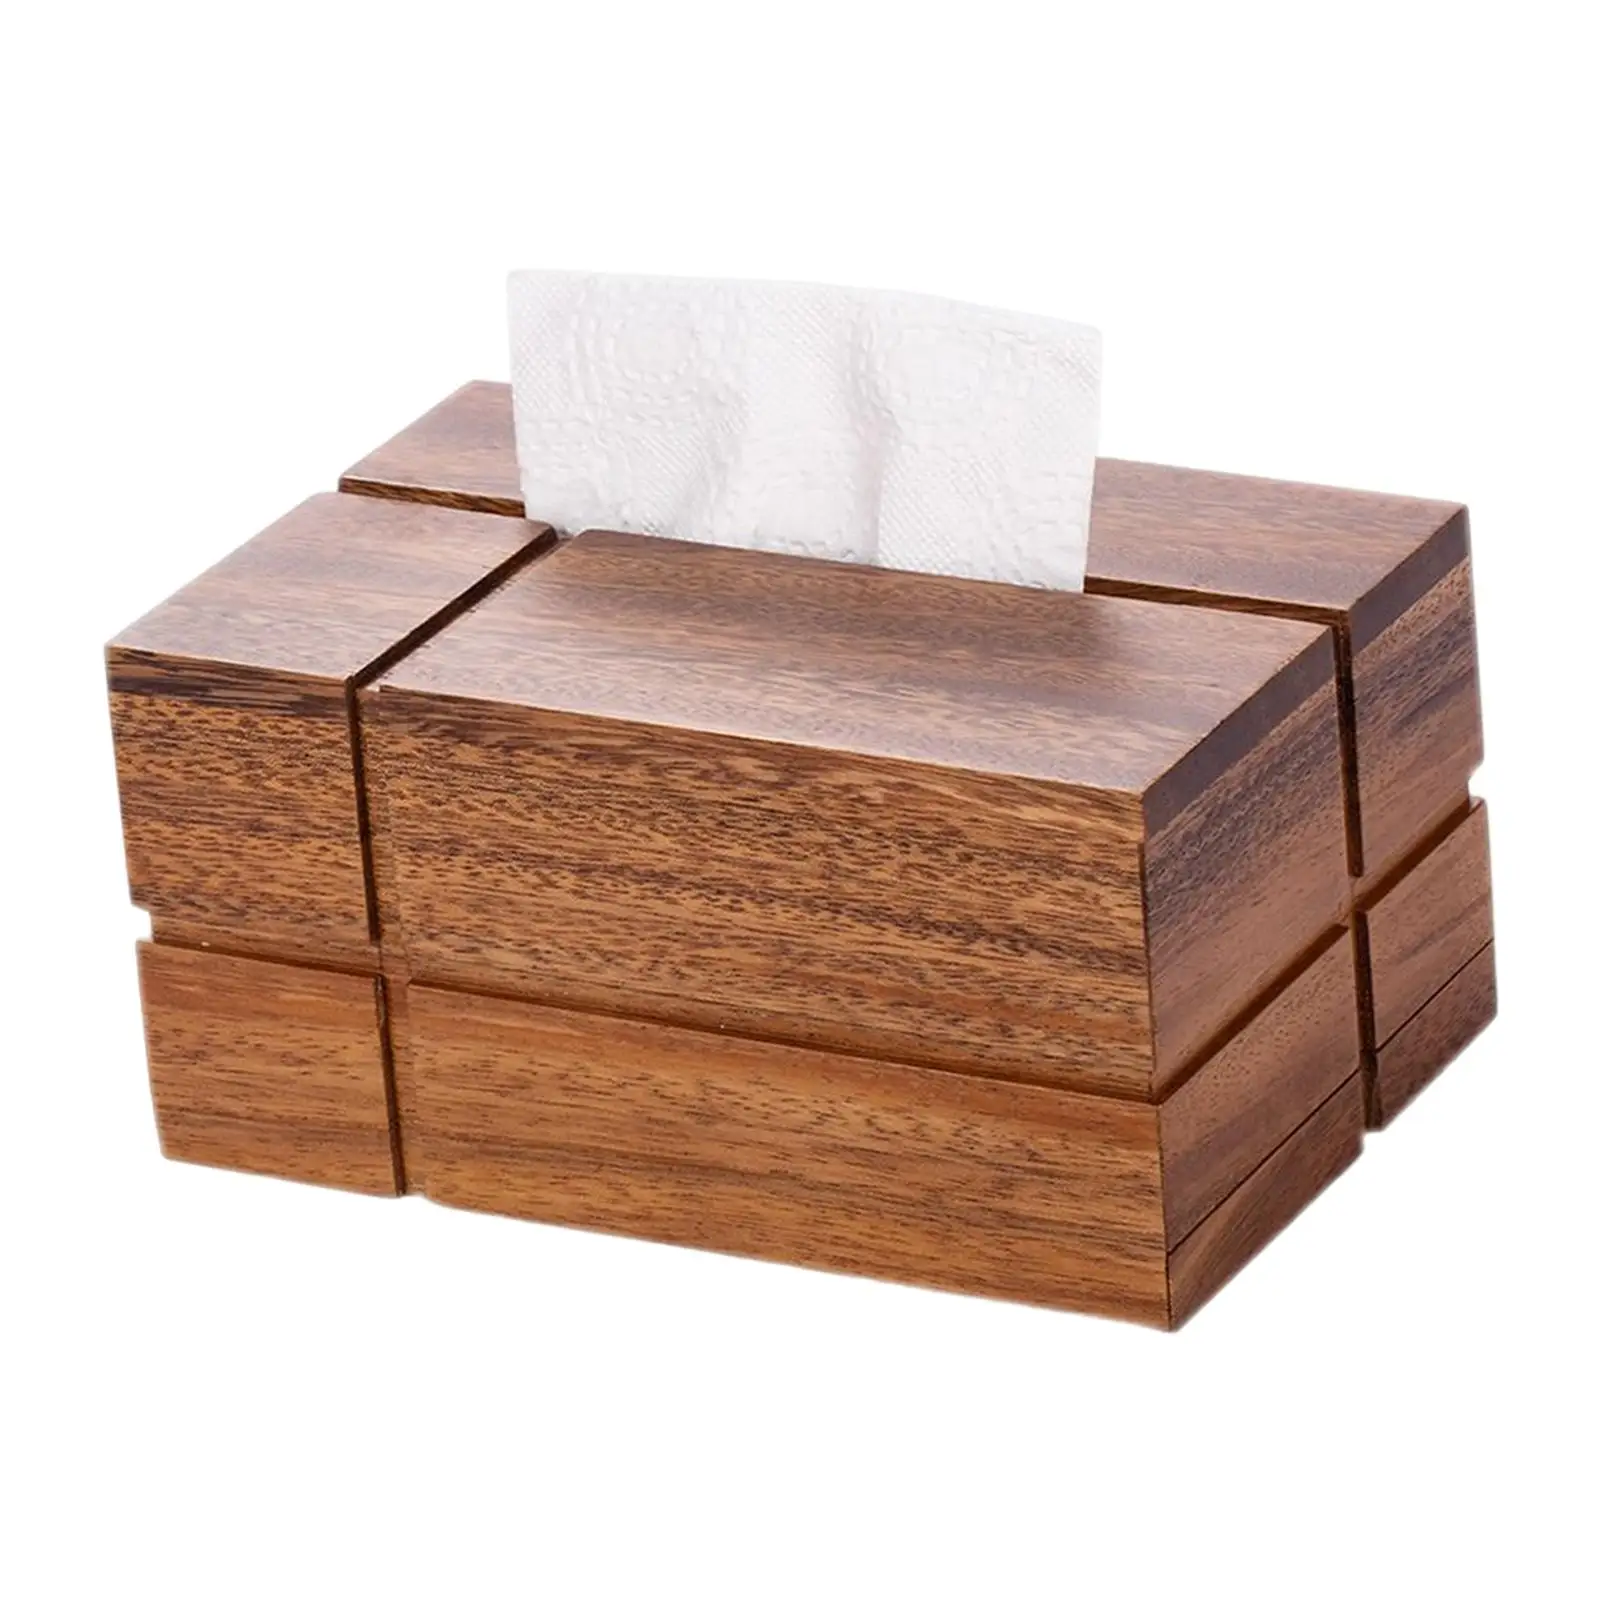 Home Solid Wood Tissue Box Crafts Durable Tissue Holder for Home Hotel Desks